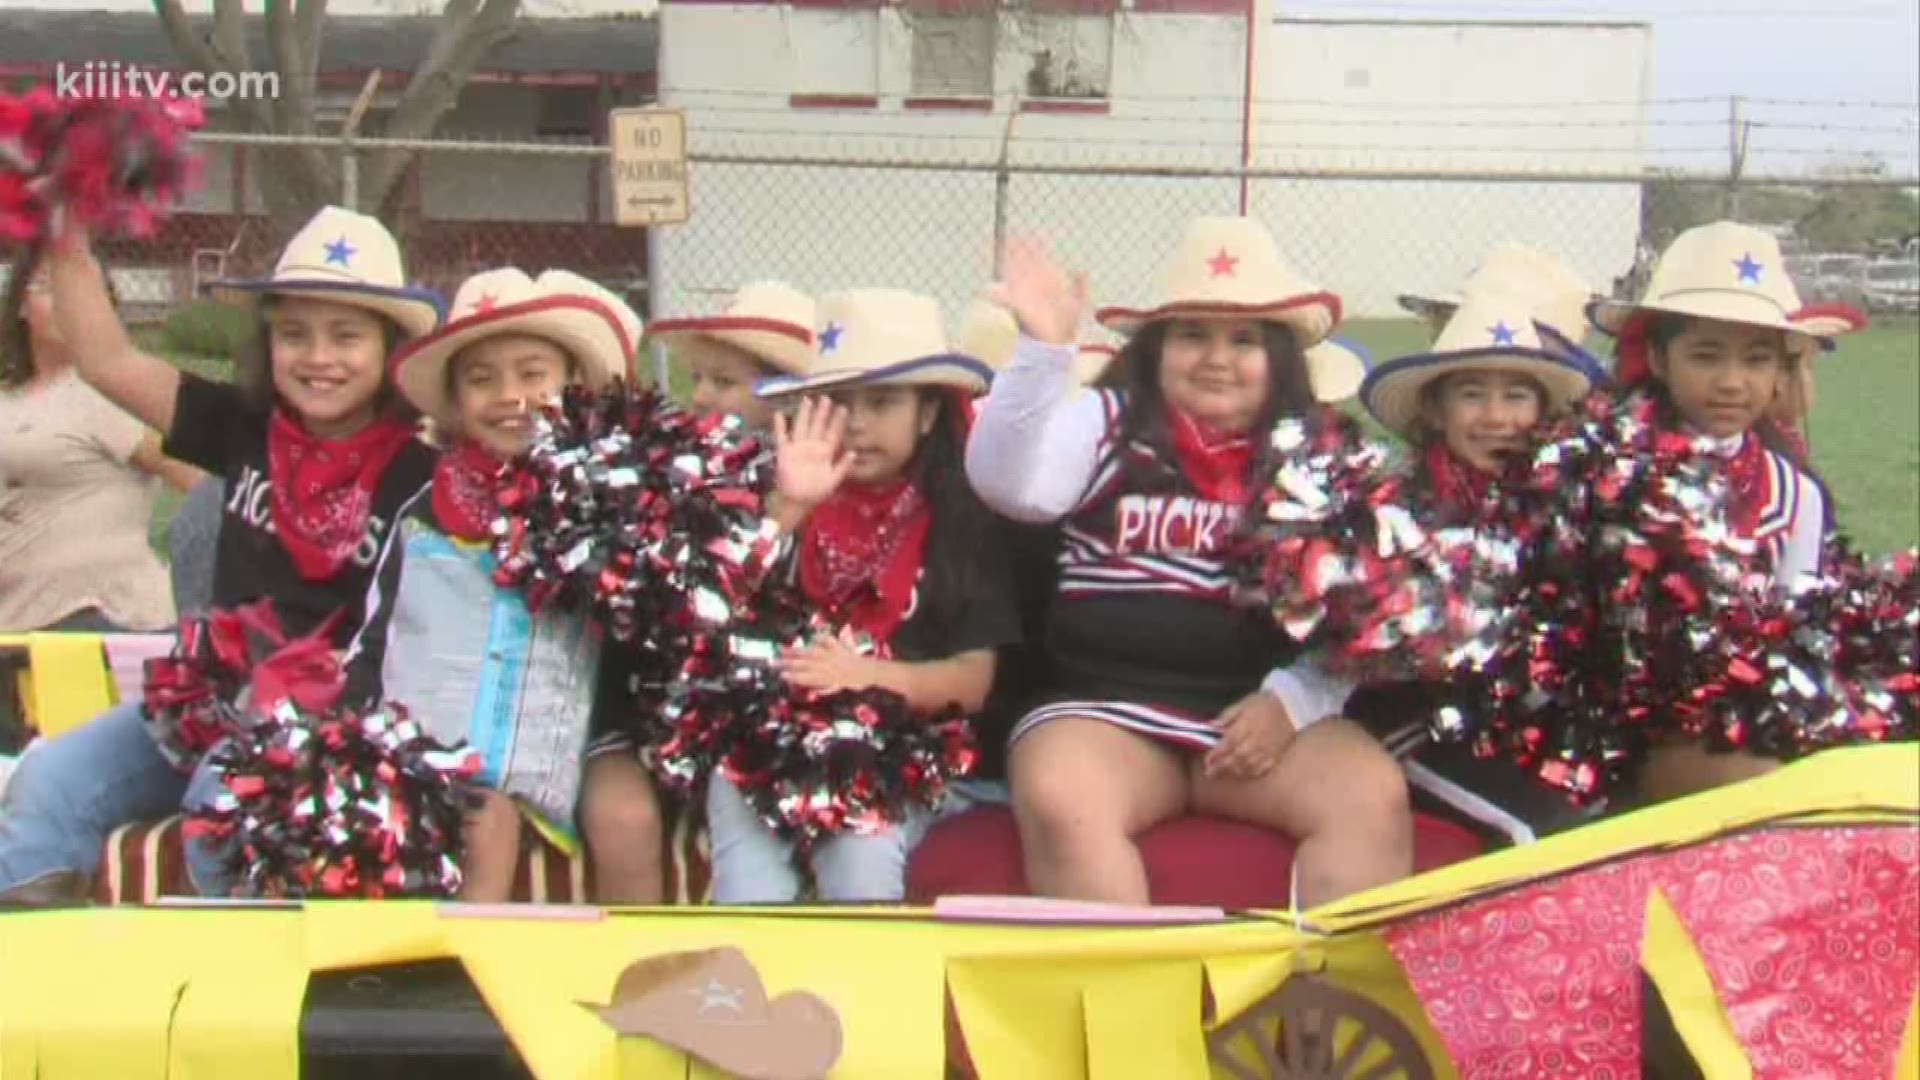 The annual parade kicked off the weekend at the Nueces County Junior Livestock Show